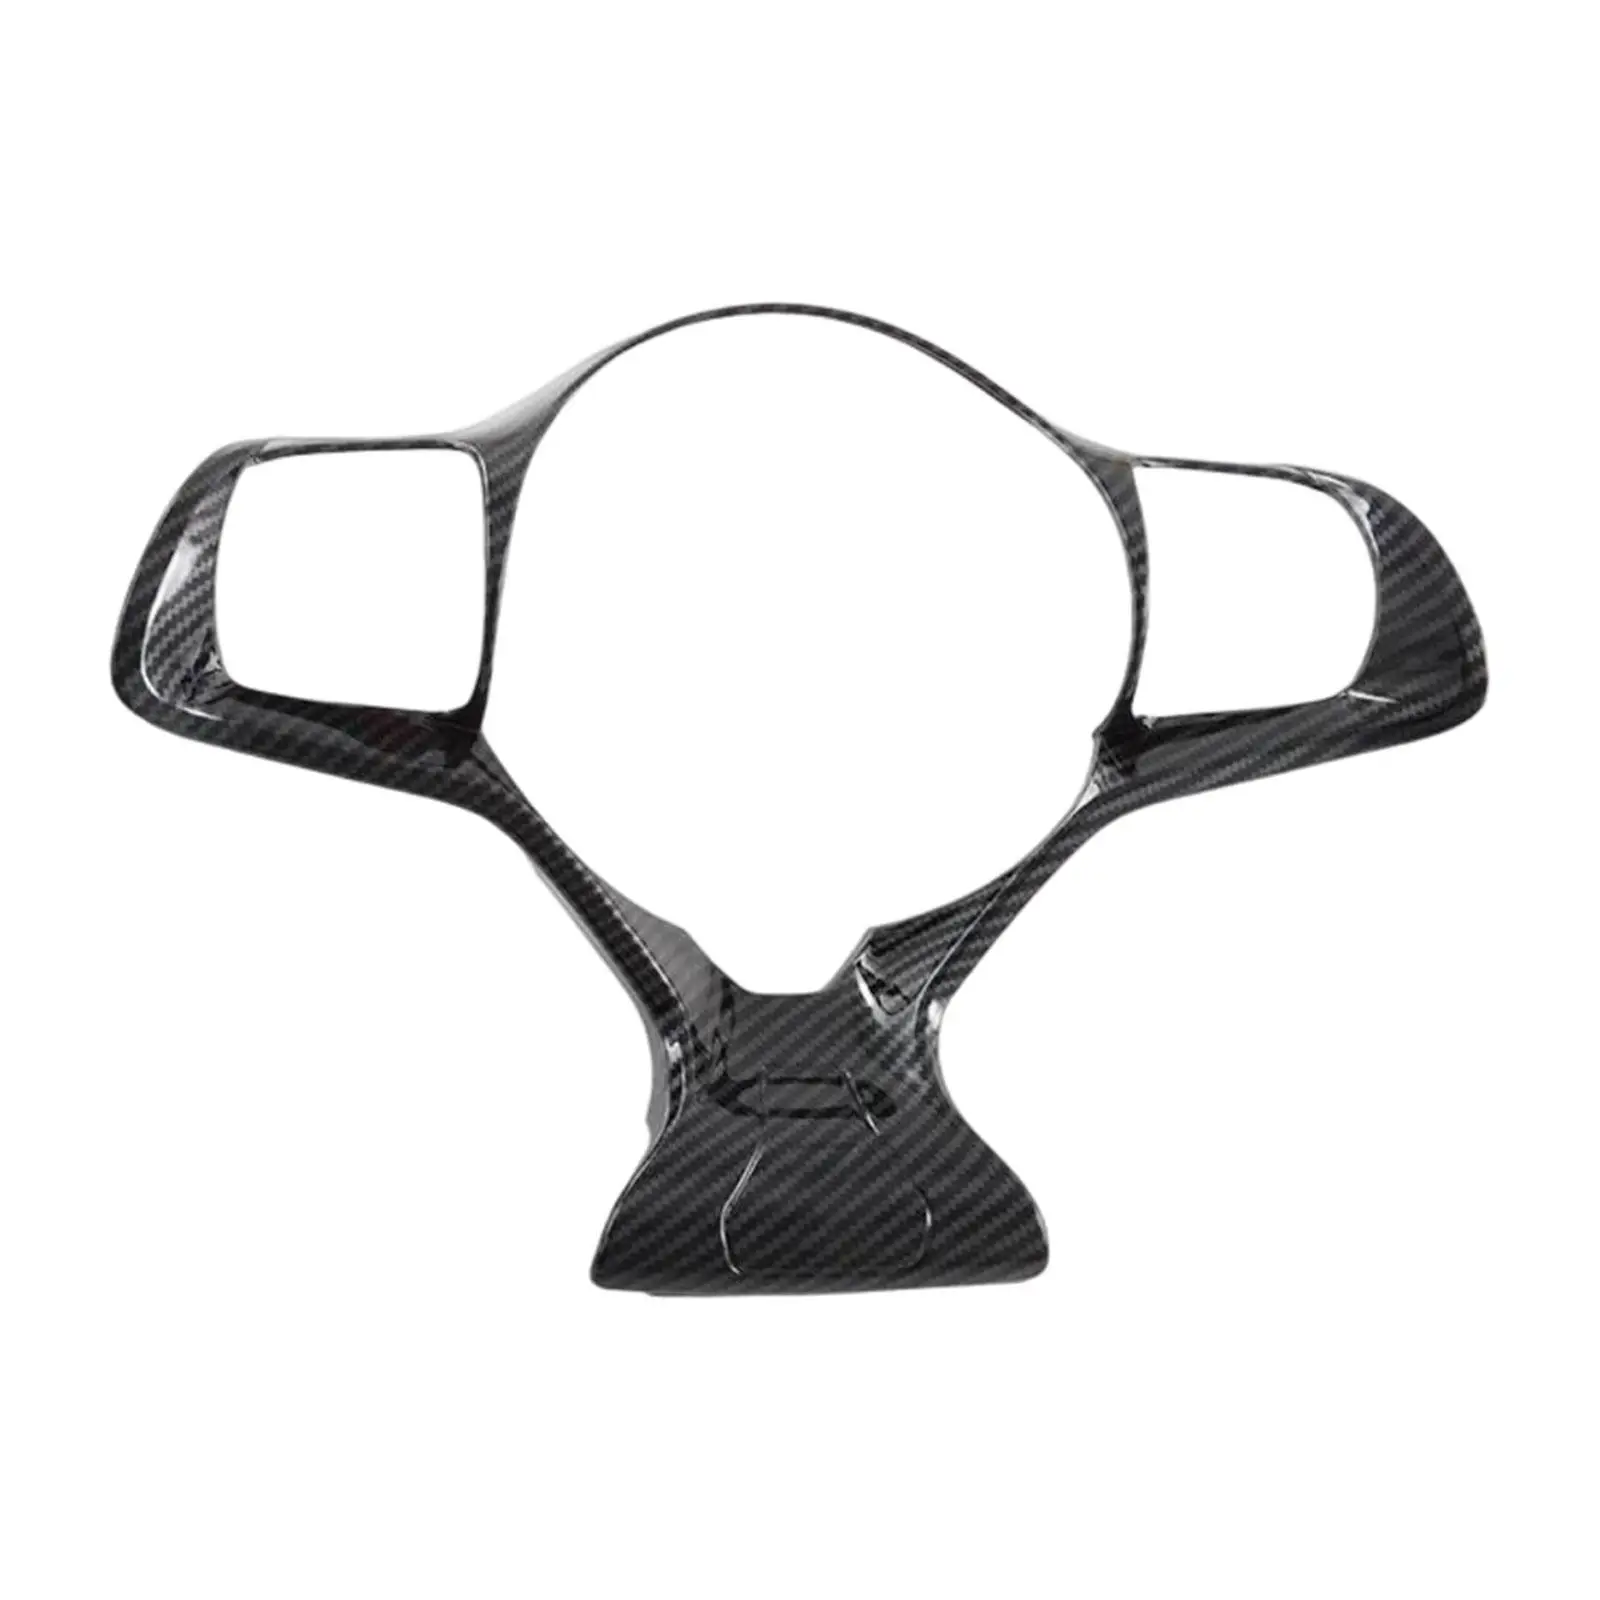 Auto Steering Wheel Cover Frame Interior for Byd Atto 3 Yuan Plus